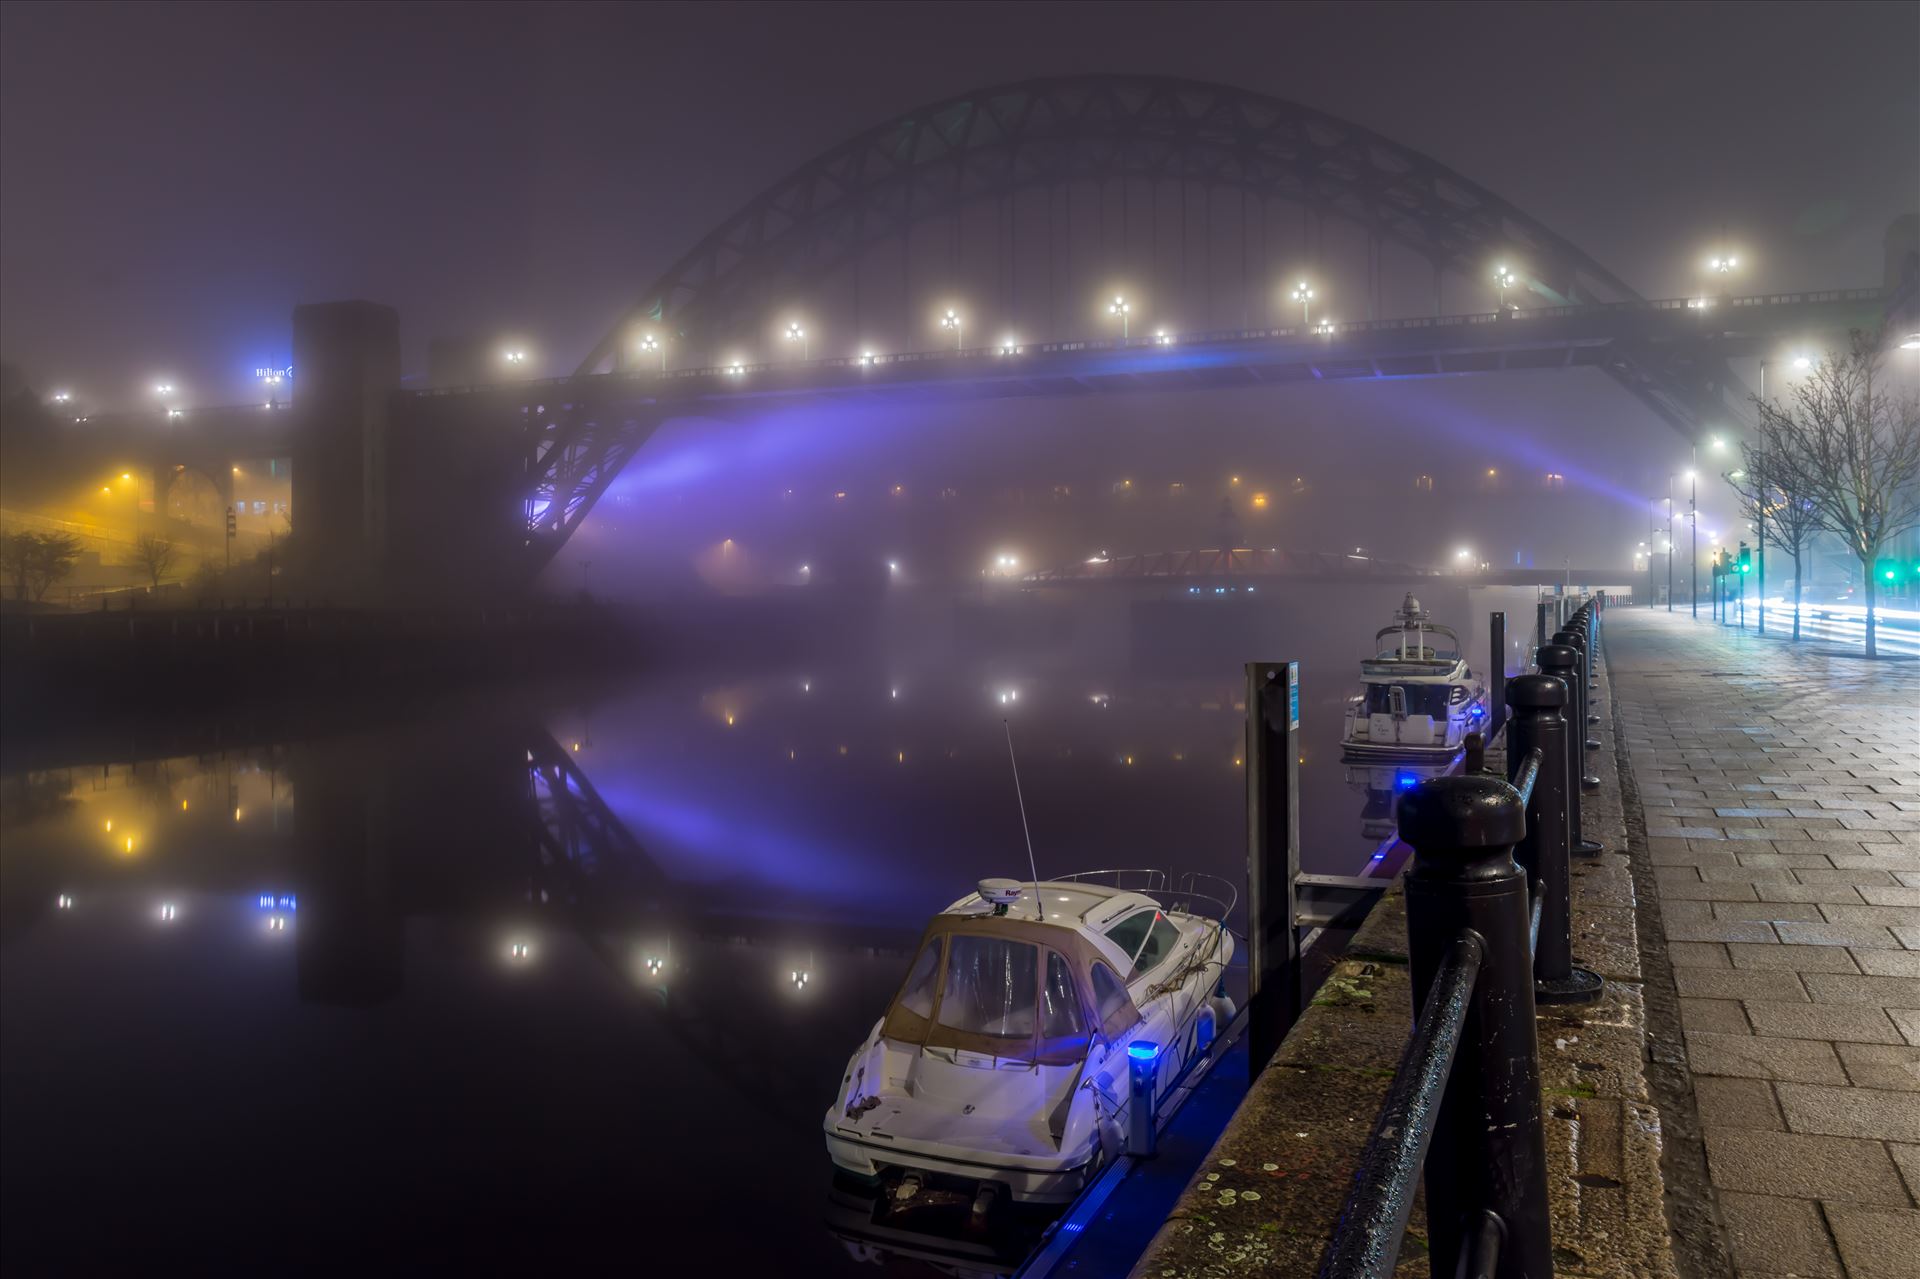 Fog on the Tyne 3 Shot on the quayside at Newcastle early one foggy morning by philreay